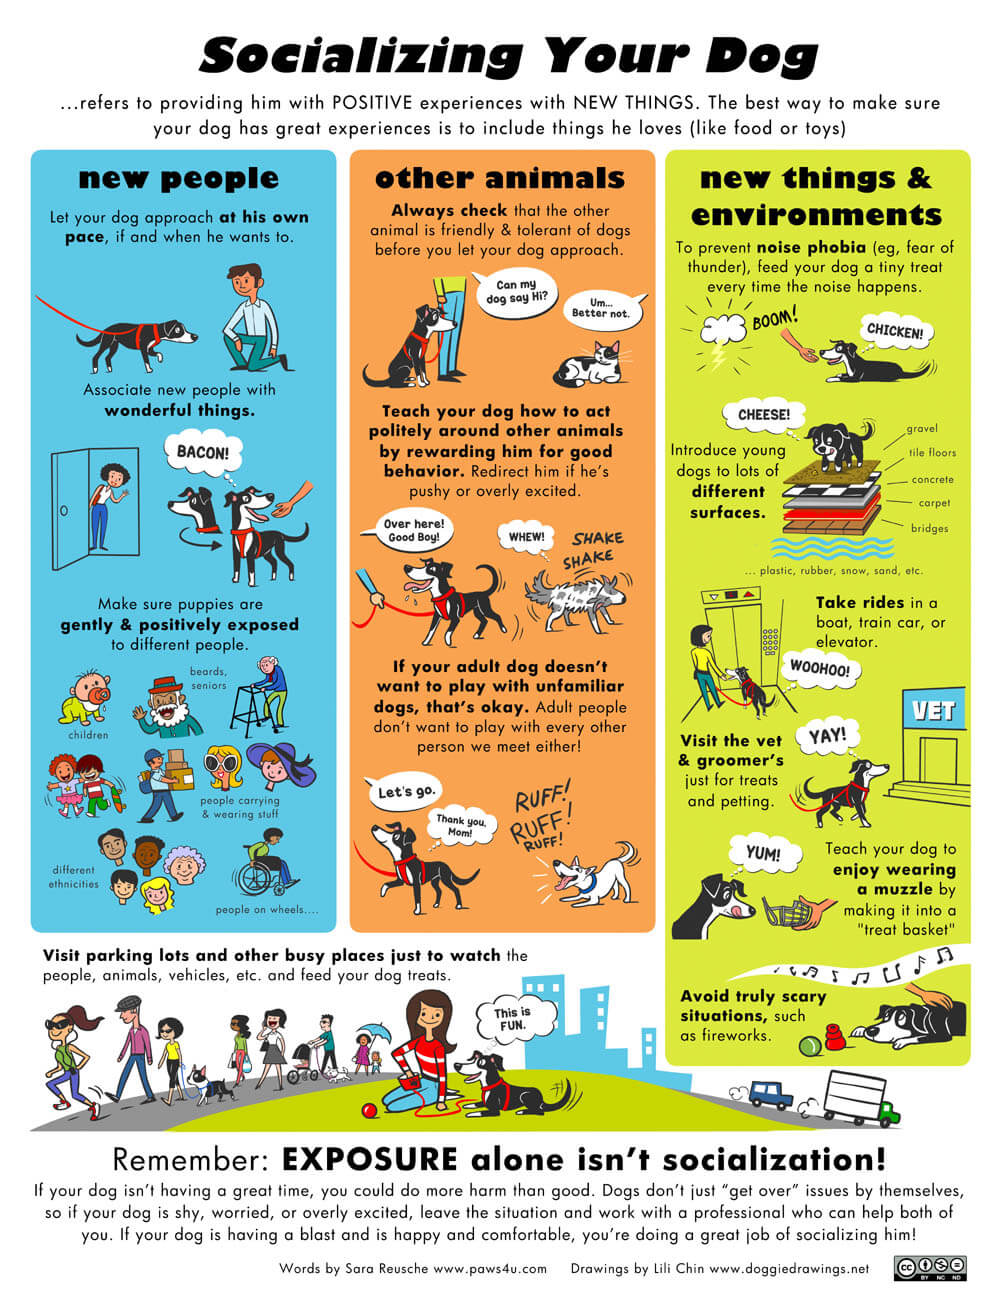 http://www.dogica.com/dogpuppy/dogs/pup-dog-socialization-infographics.jpg